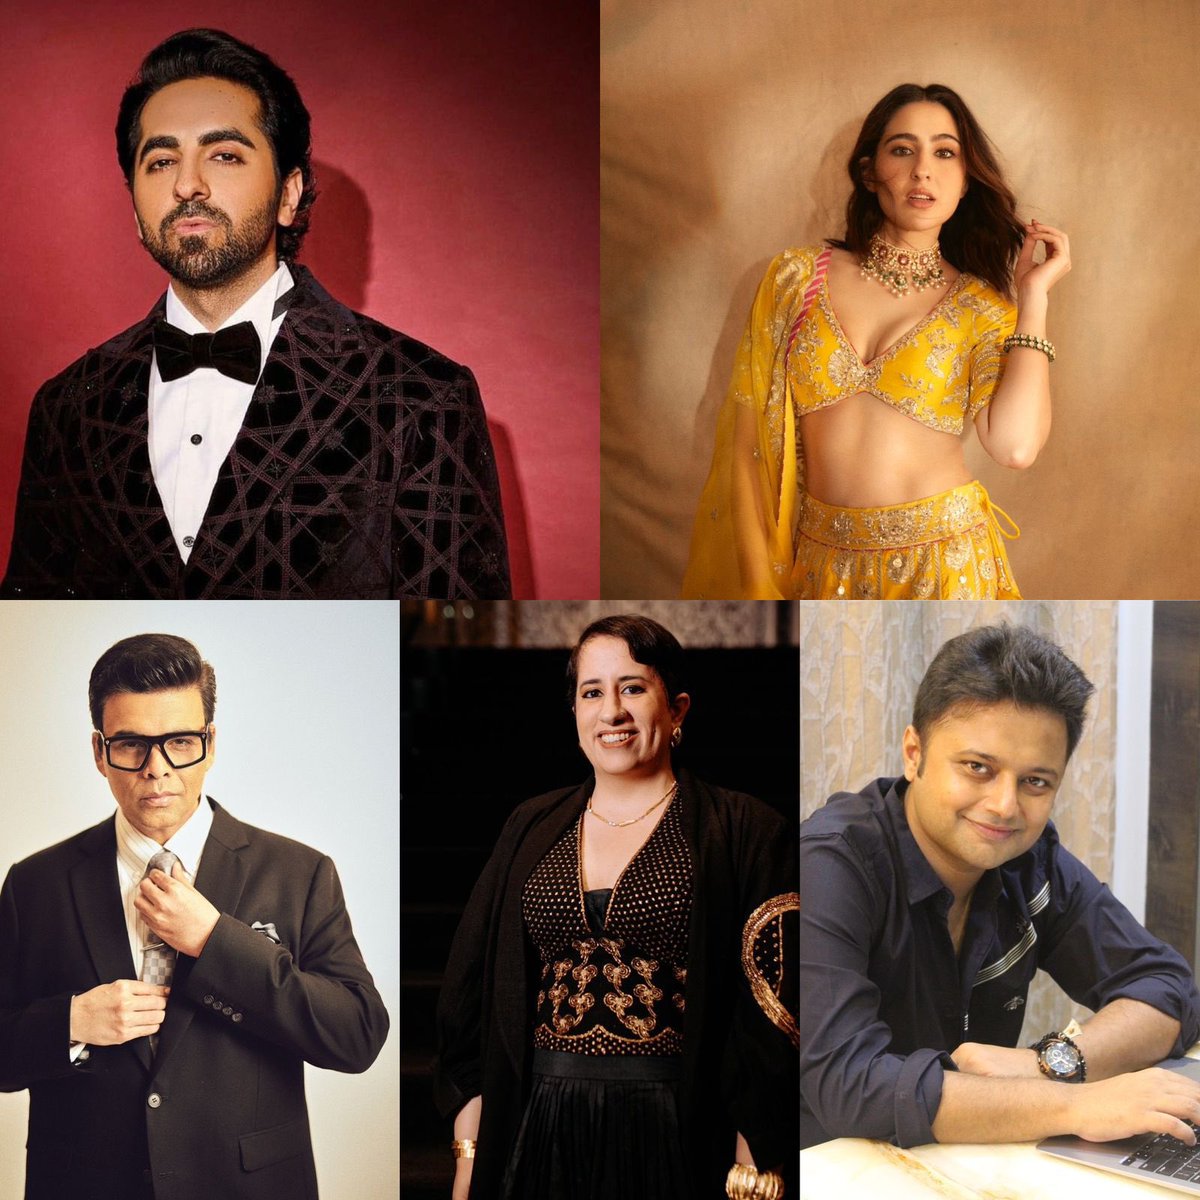 #AyushmannKhurrana and #SaraAliKhan come together for #KaranJohar and #GuneetMonga’s unique action-comedy that would be directed by Aakash Kaushik. Shooting has kick started for this Dharma Productions & Sikhya Entertainment third theatrical collaboration. Title to be announced